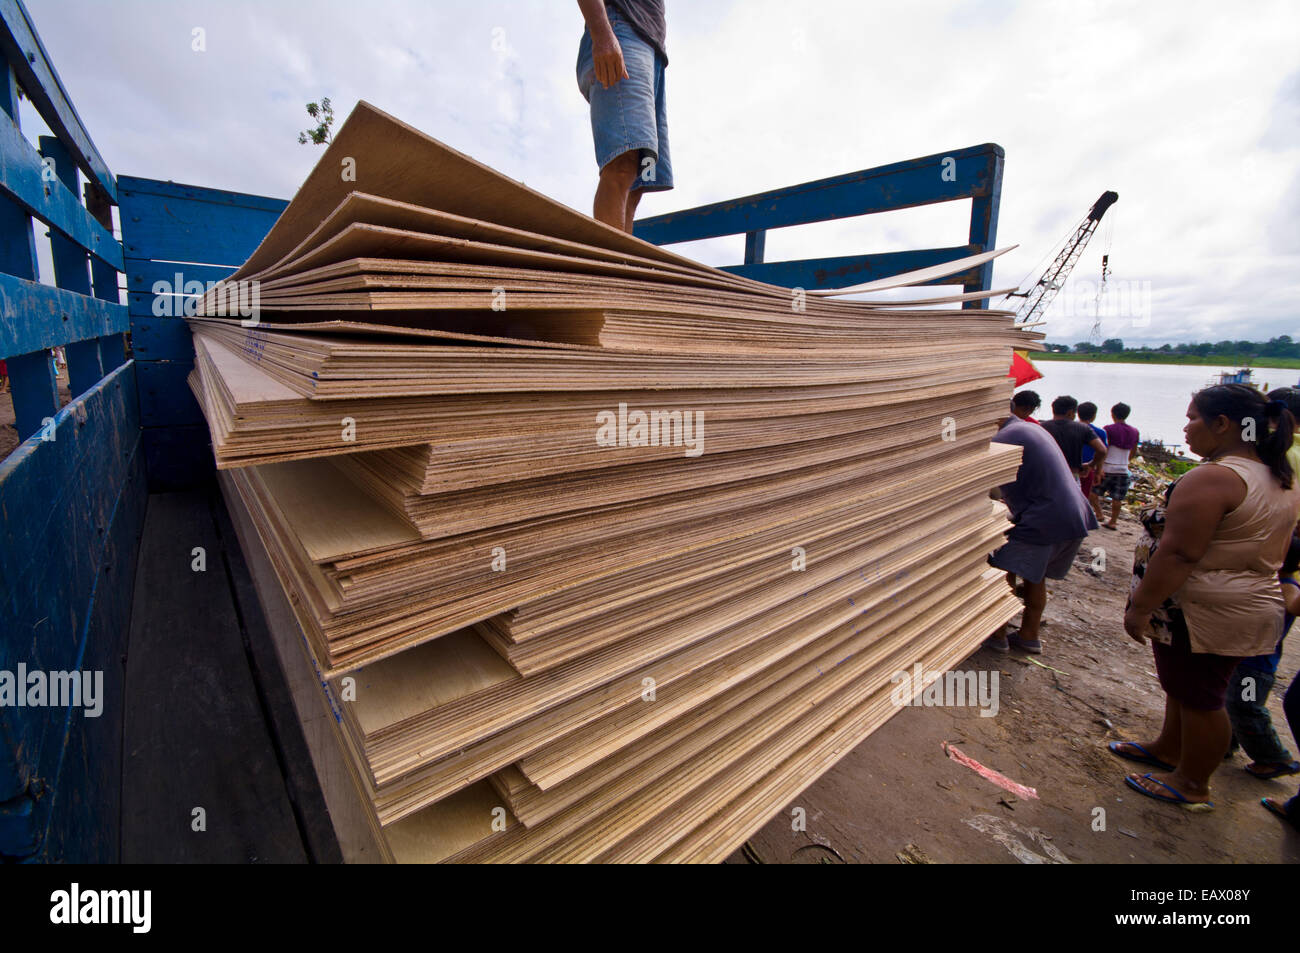 Timber planks are cut in a single piece from large Amazon rainforest trees for use in construction. Stock Photo